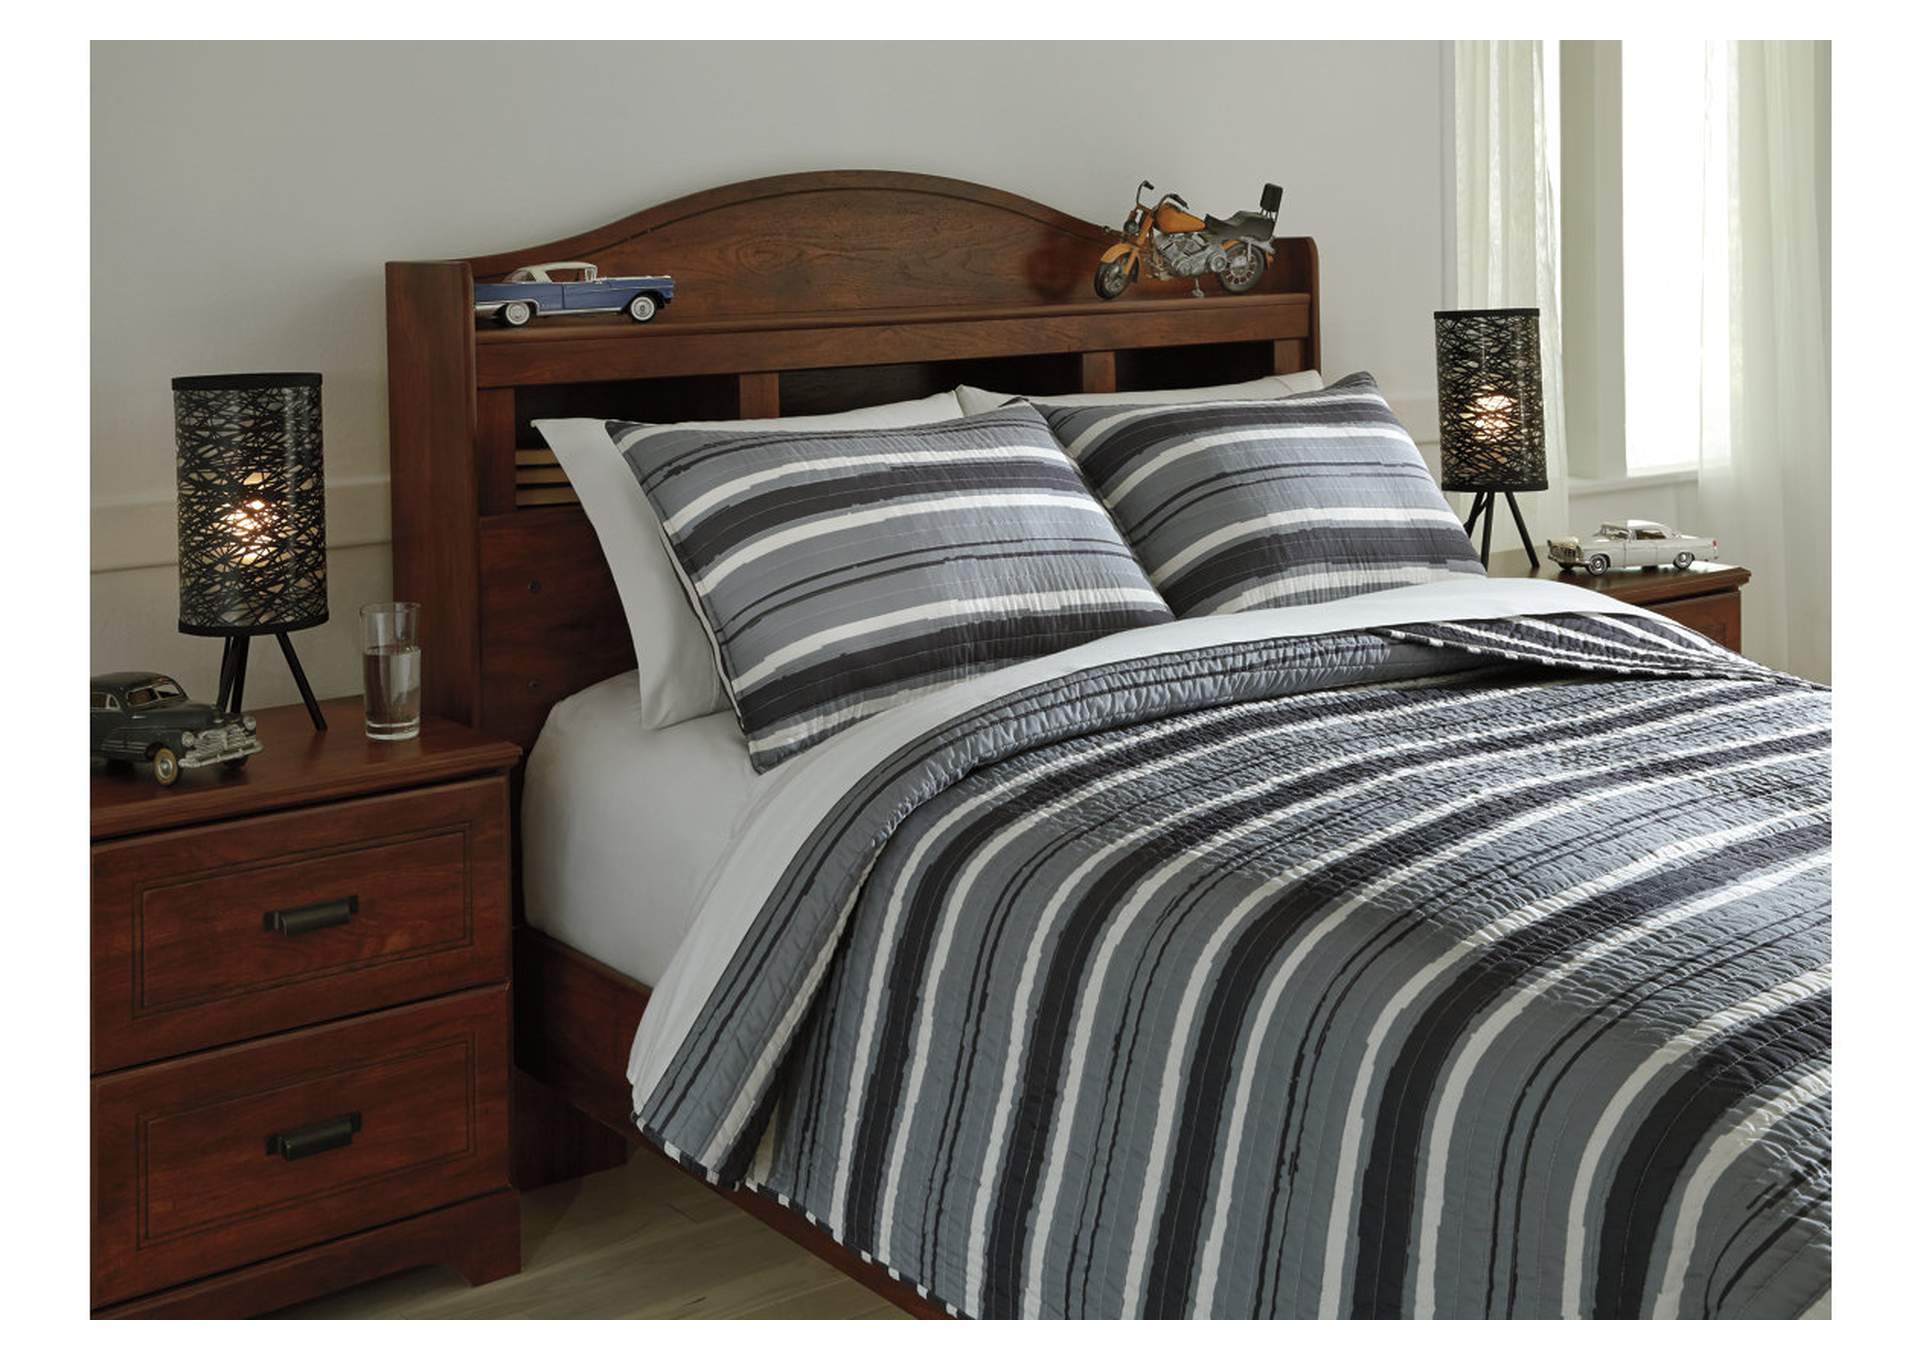 Merlin 3-Piece Full Coverlet Set,Direct To Consumer Express